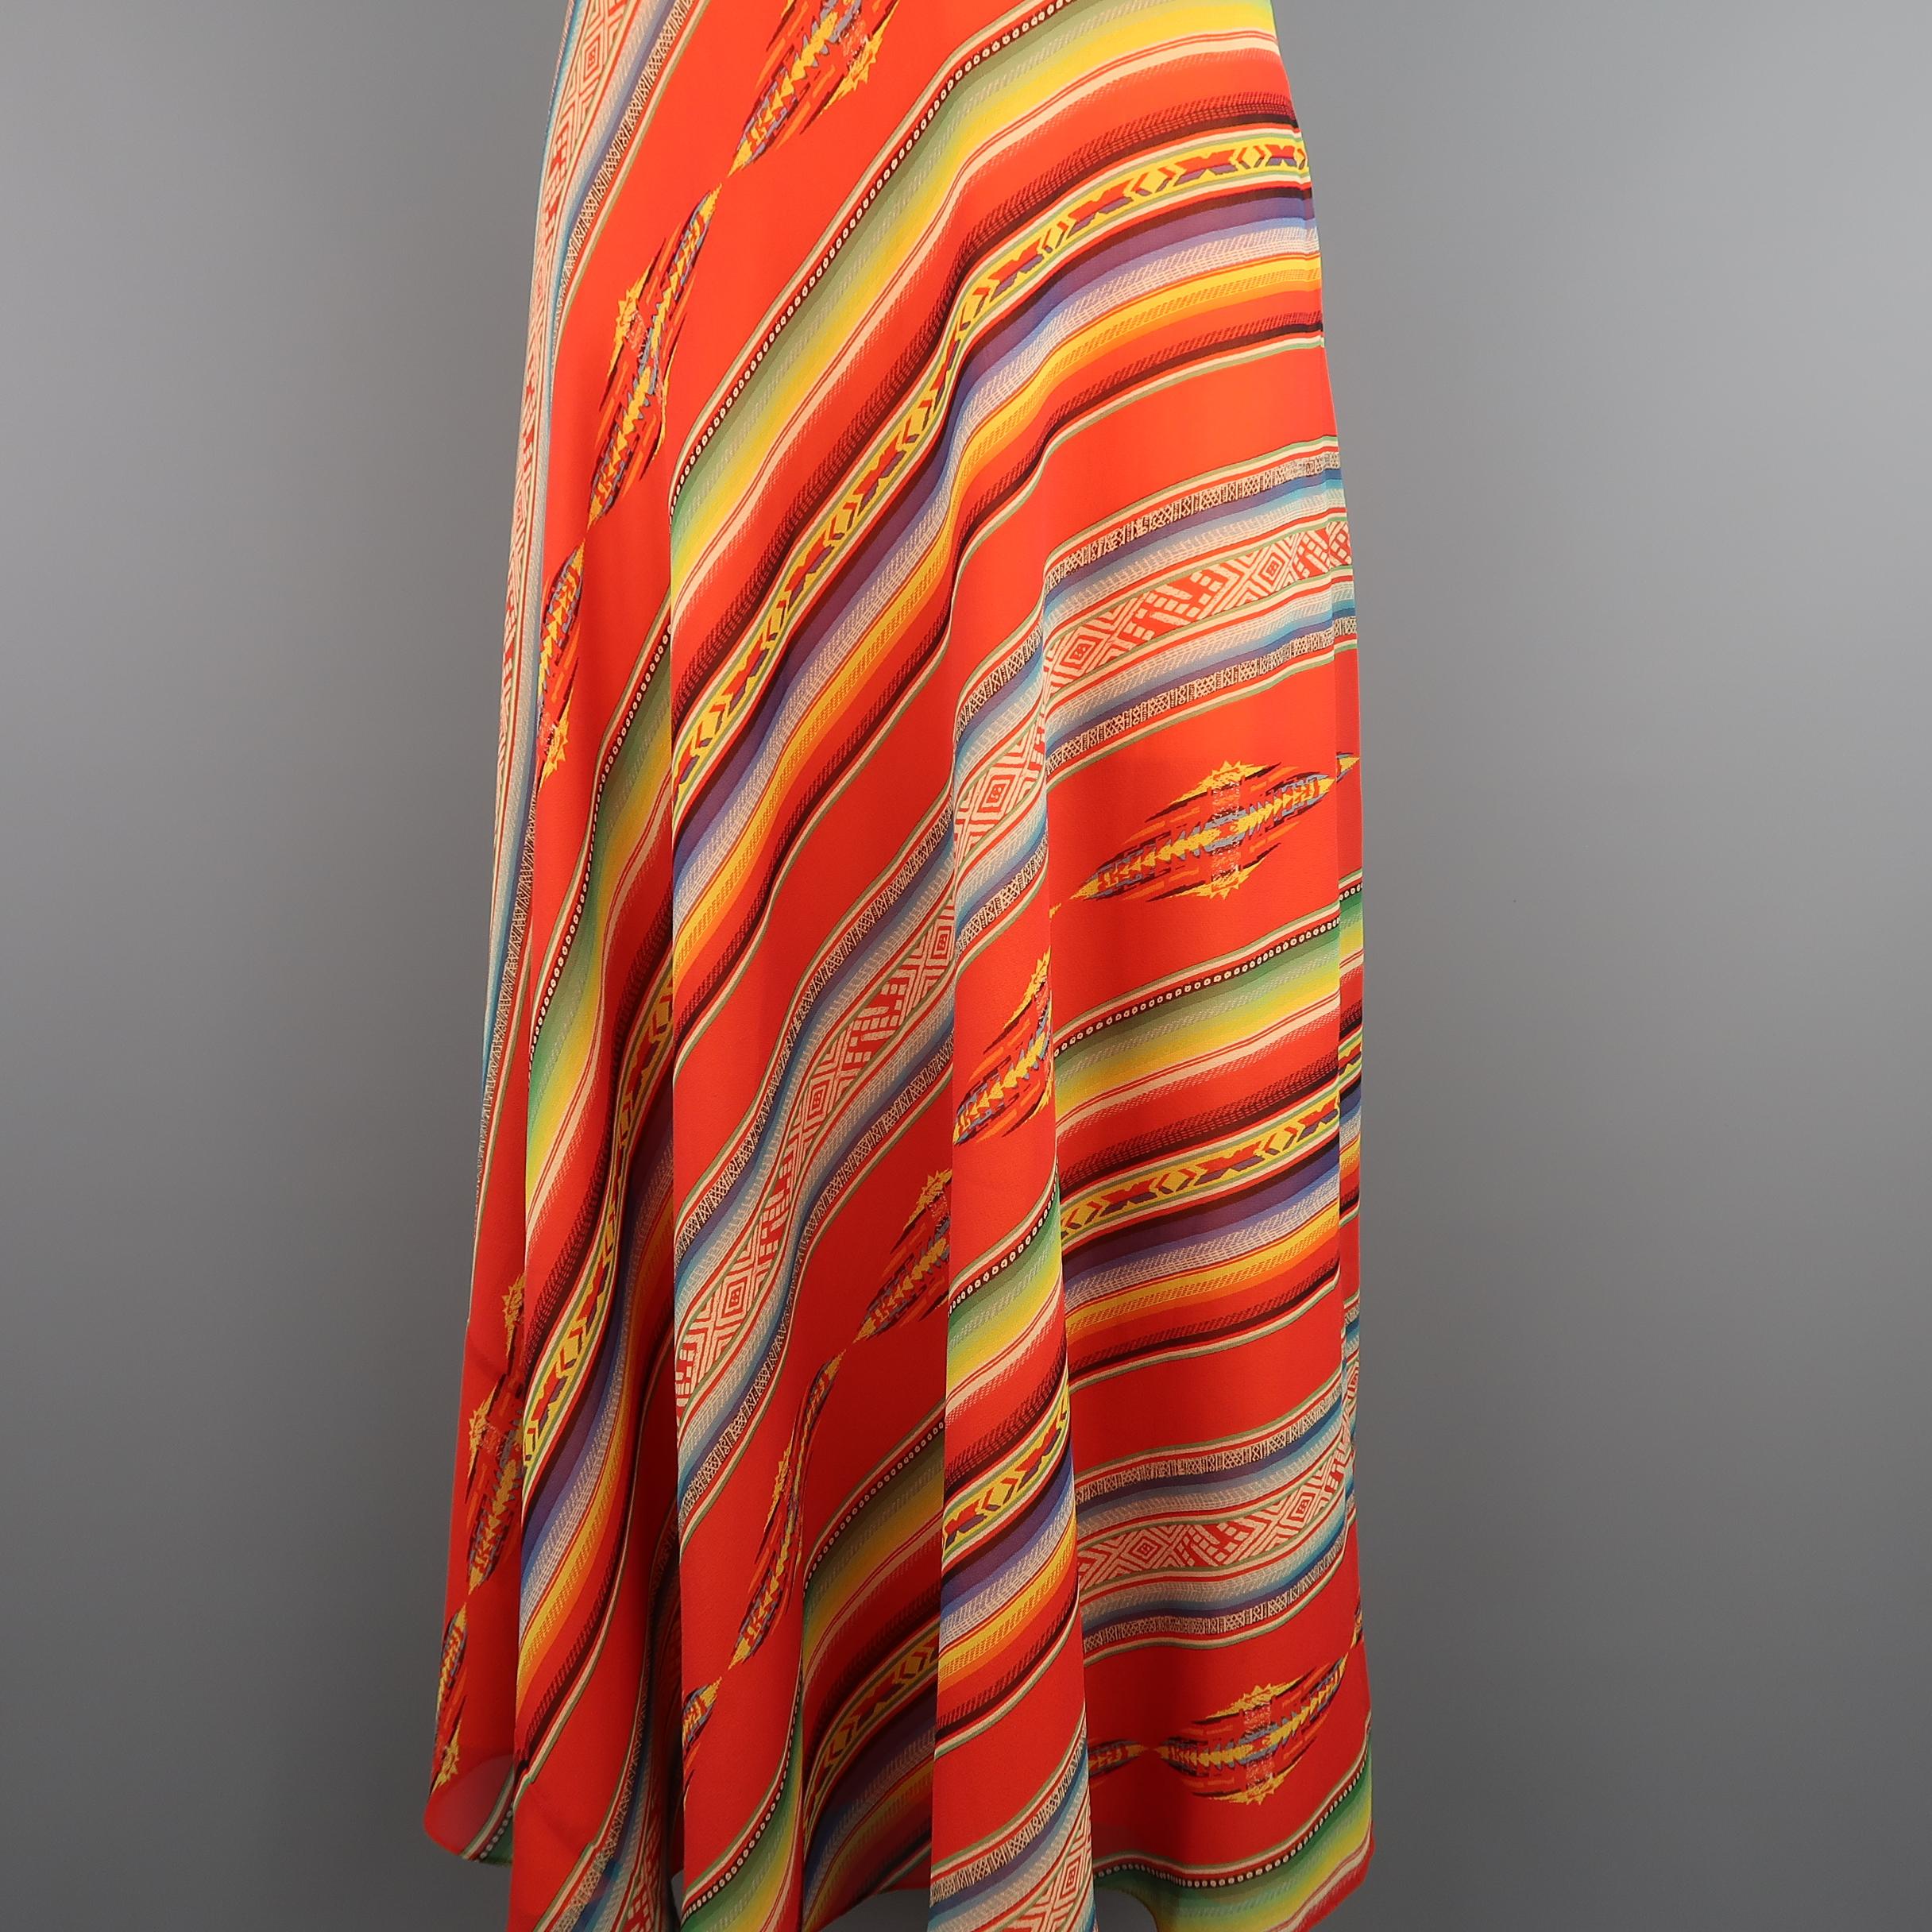 RALPH LAUREN maxi skirt comes in a vibrant orange red silk chiffon with all over multi-color Mexican Serape blanket print with asymmetrical panels and ruffled hem.
 
Excellent Pre-Owned Condition. Retails: $799.00.
Marked: 6
 
Measurements:
 
Waist: